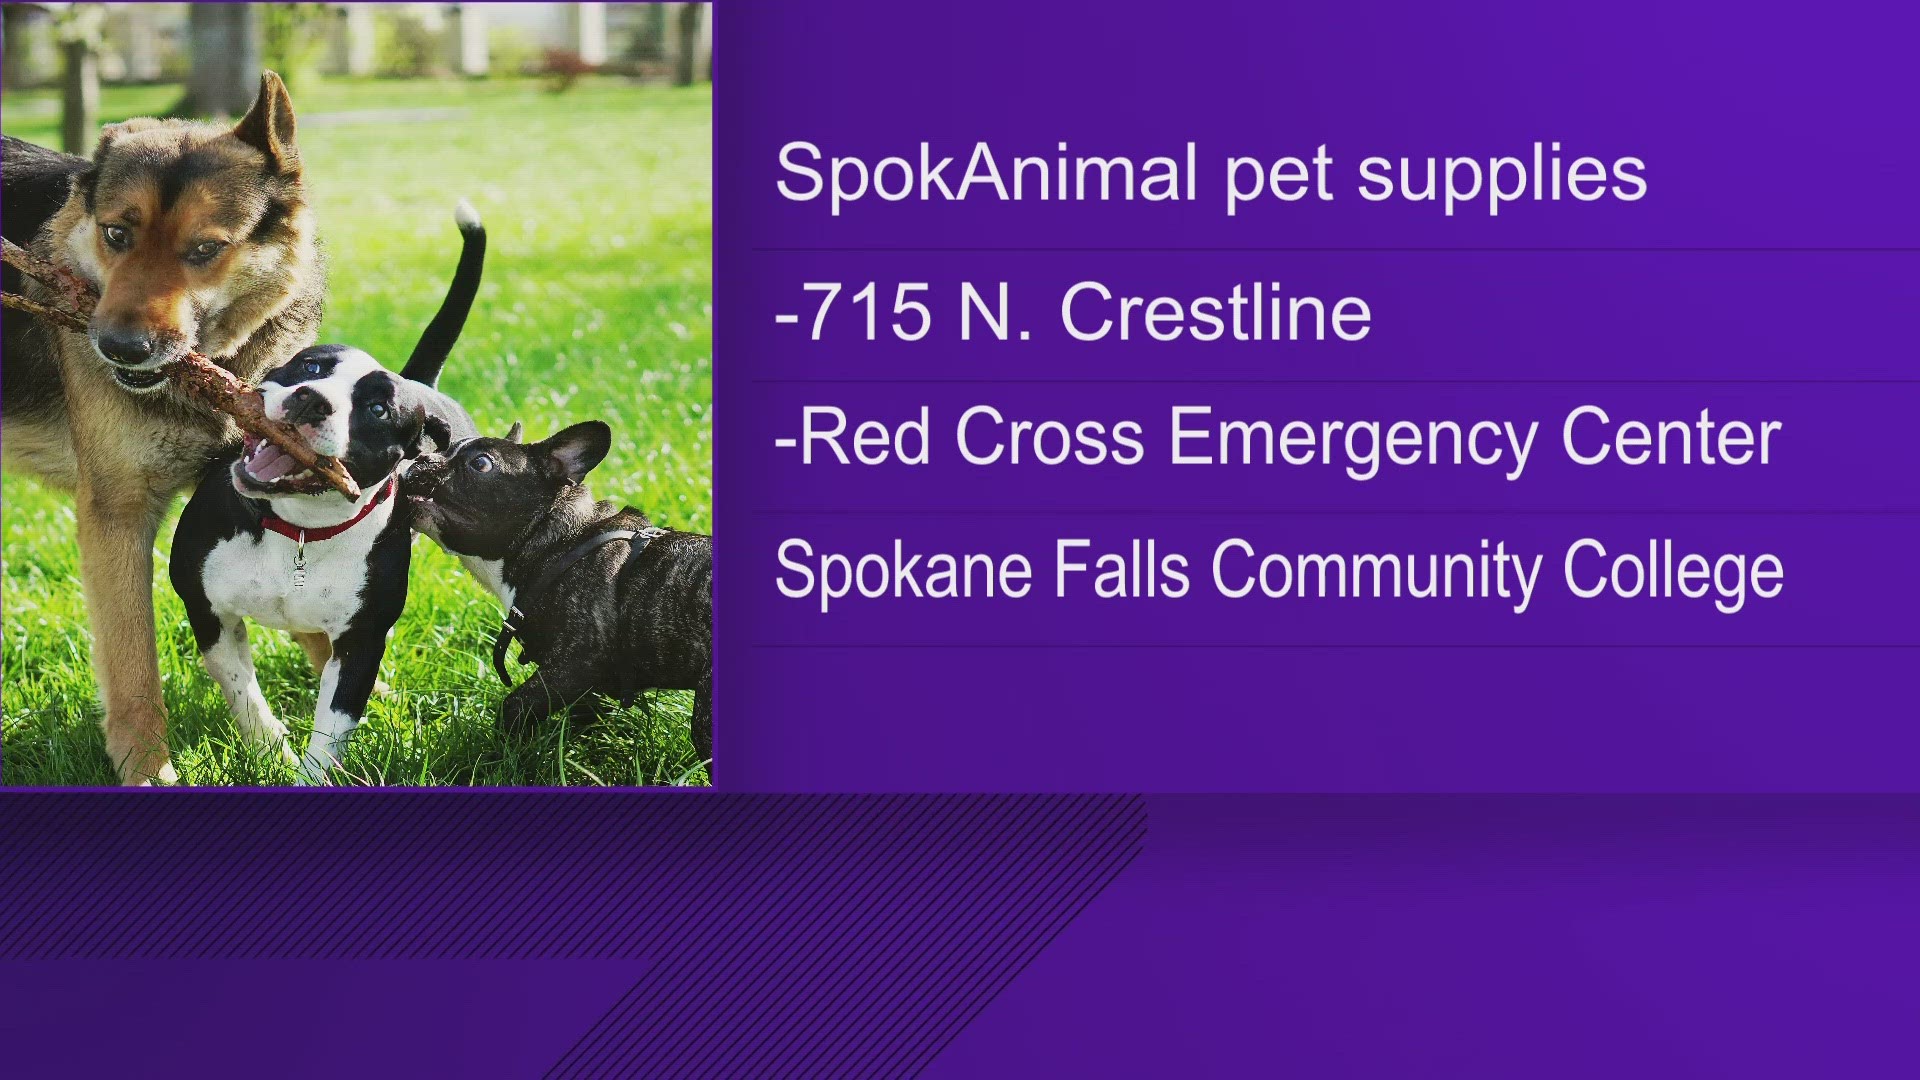 Starting Tuesday, any pet owner impacted by the Gray Fire or Oregon Road Fire can come to the SpokAnimal Resource Center and pick up supplies.